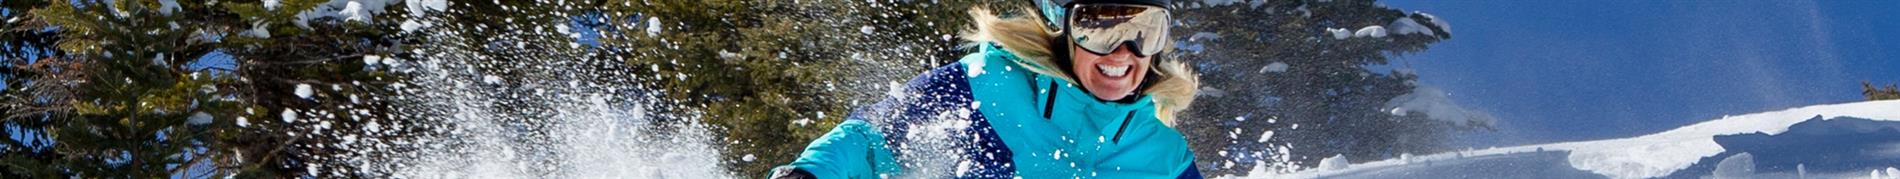 Patagonia Women's Winter Jackets for Skiing, Snowboarding and More 